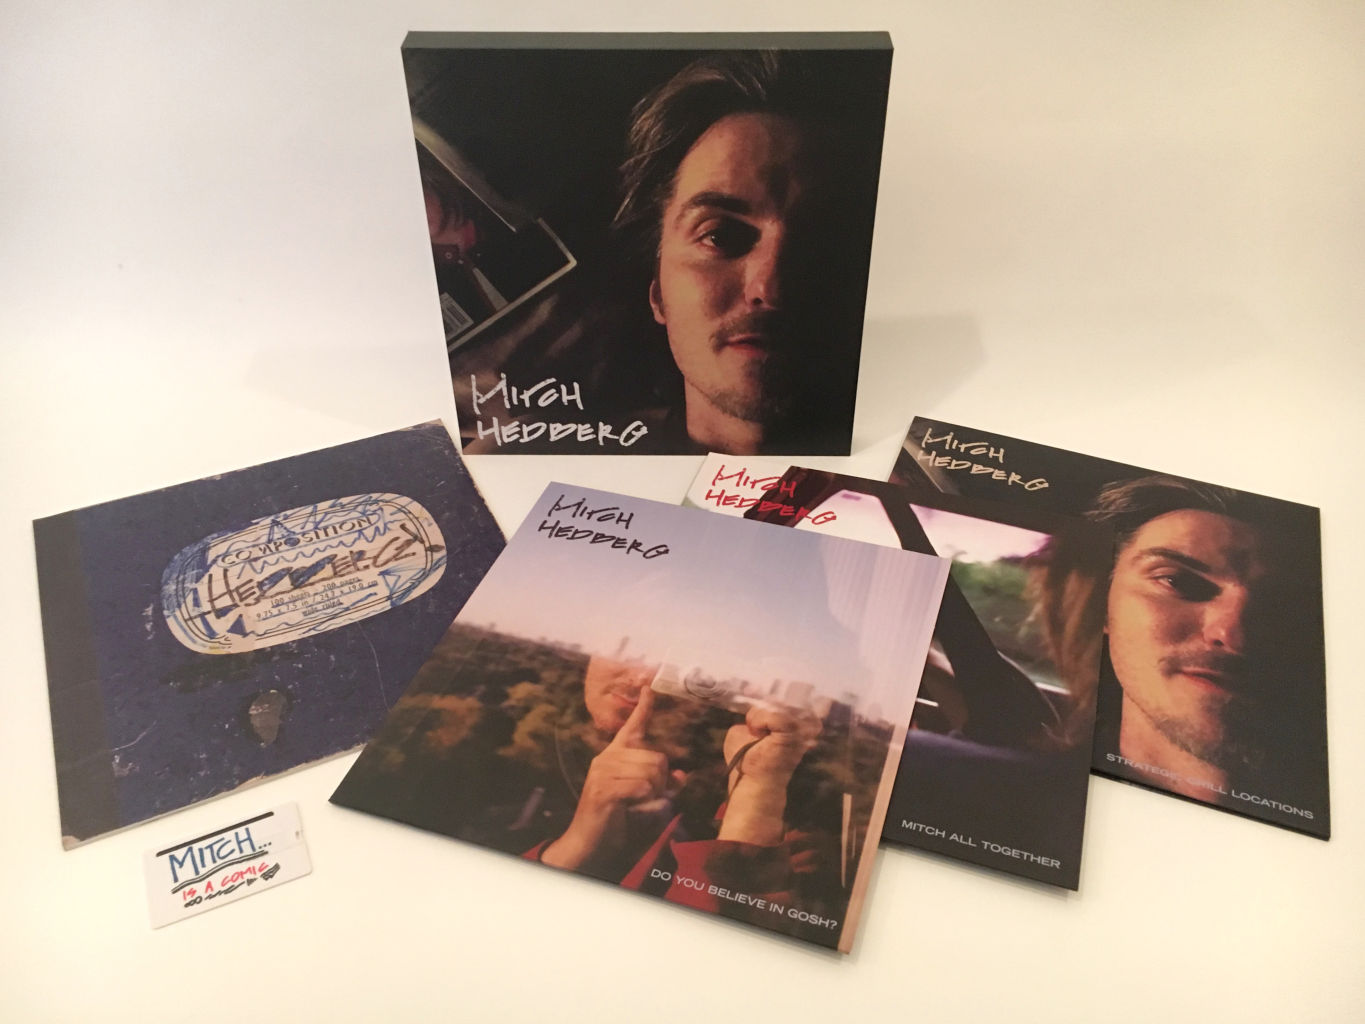 Comedy Central selling entire Mitch Hedberg record collection as new box set of LP vinyl albums, book and MP3s